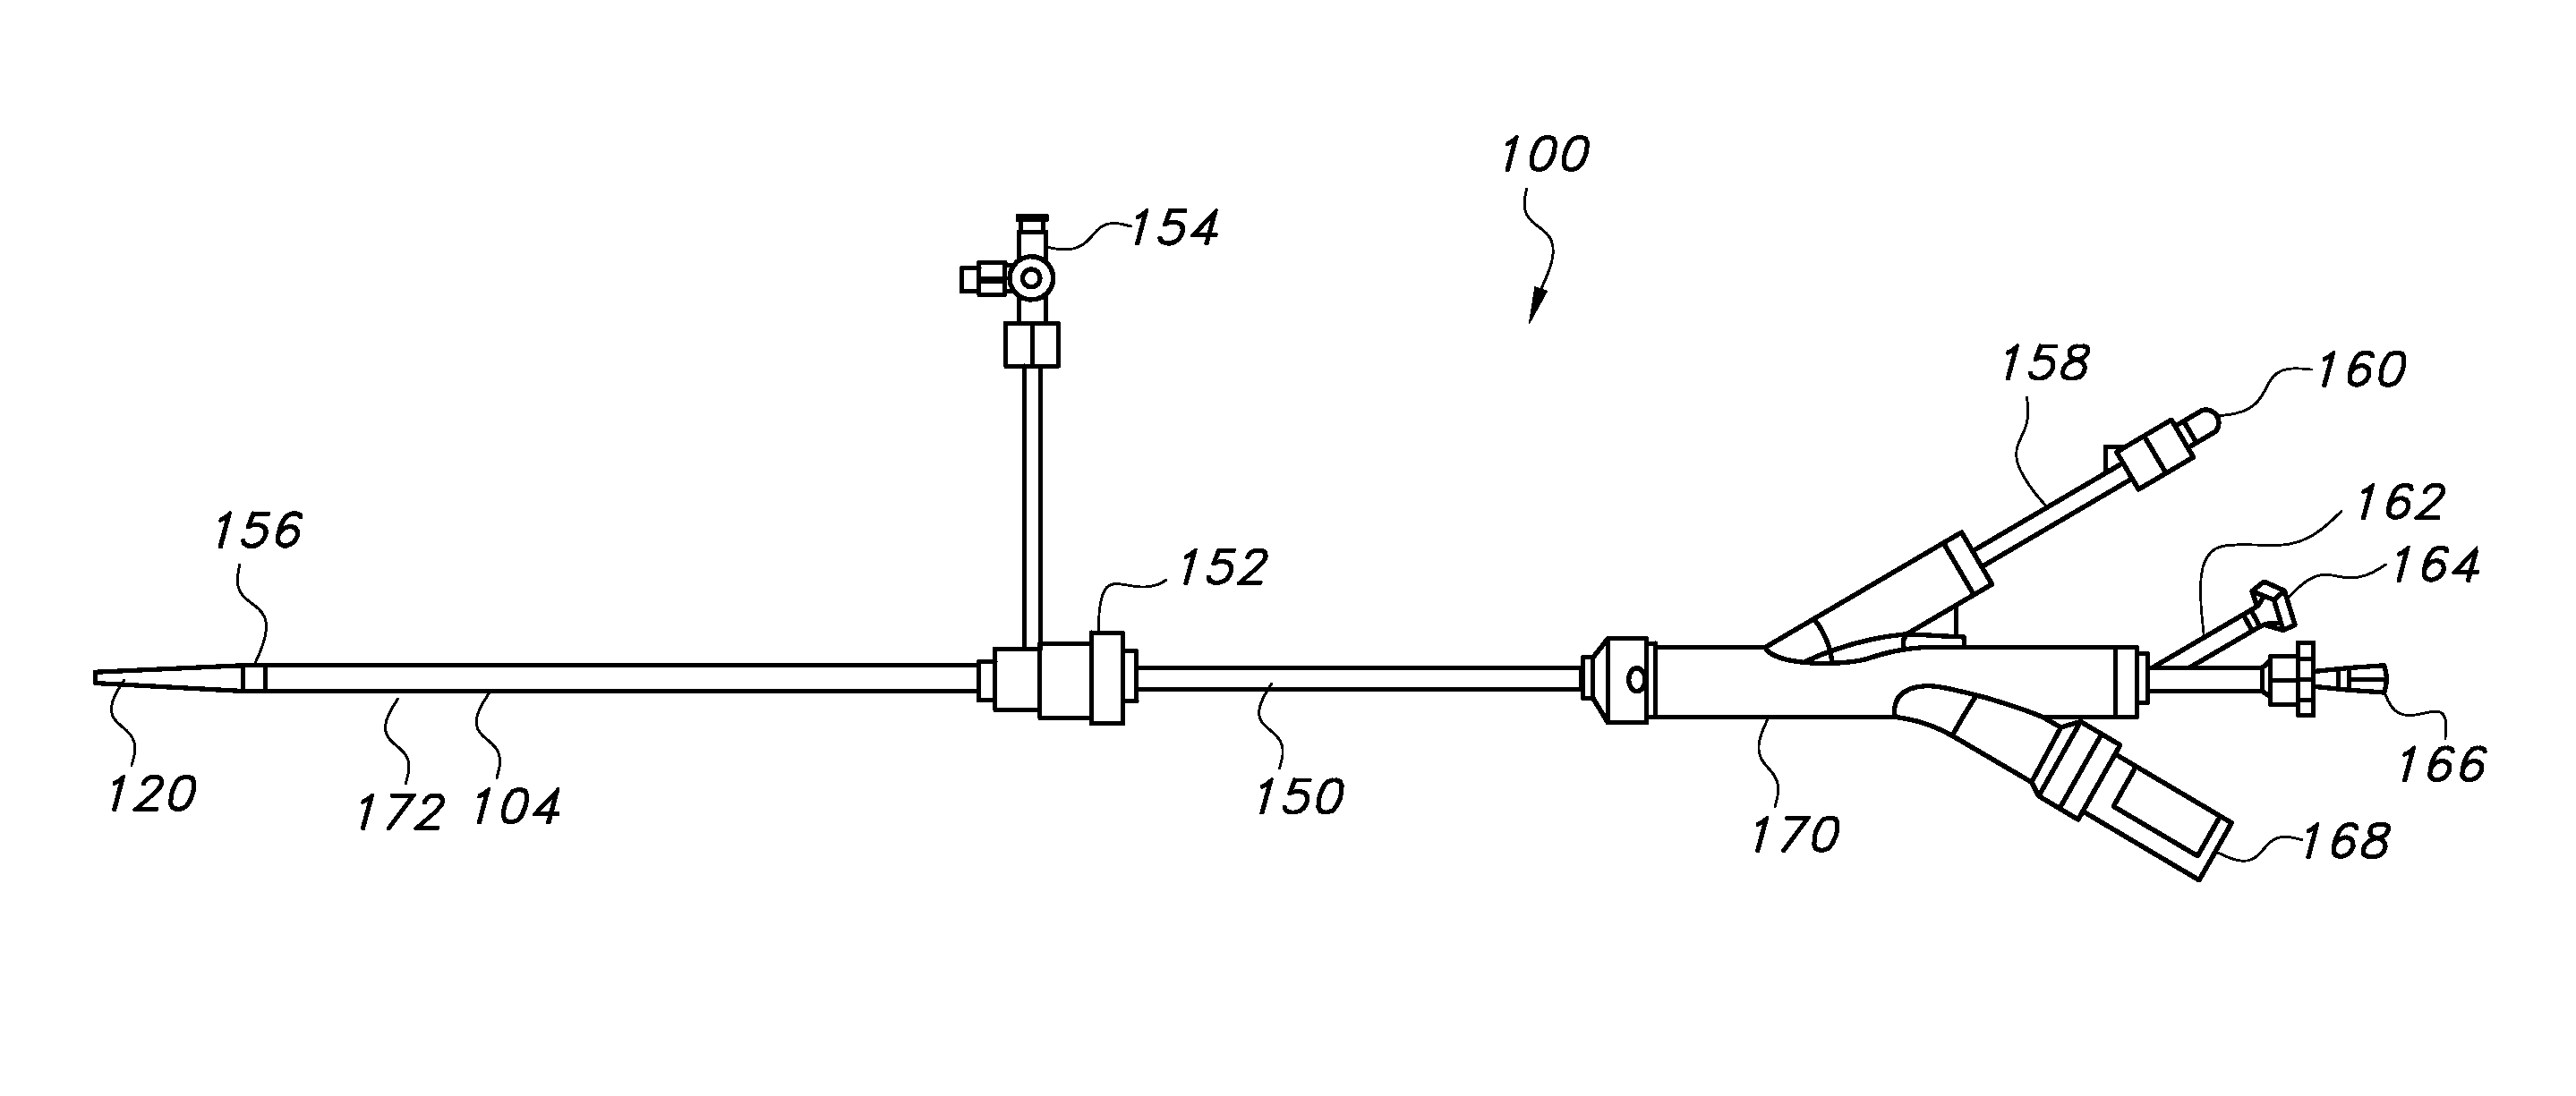 Endovascular delivery system with an improved radiopaque marker scheme